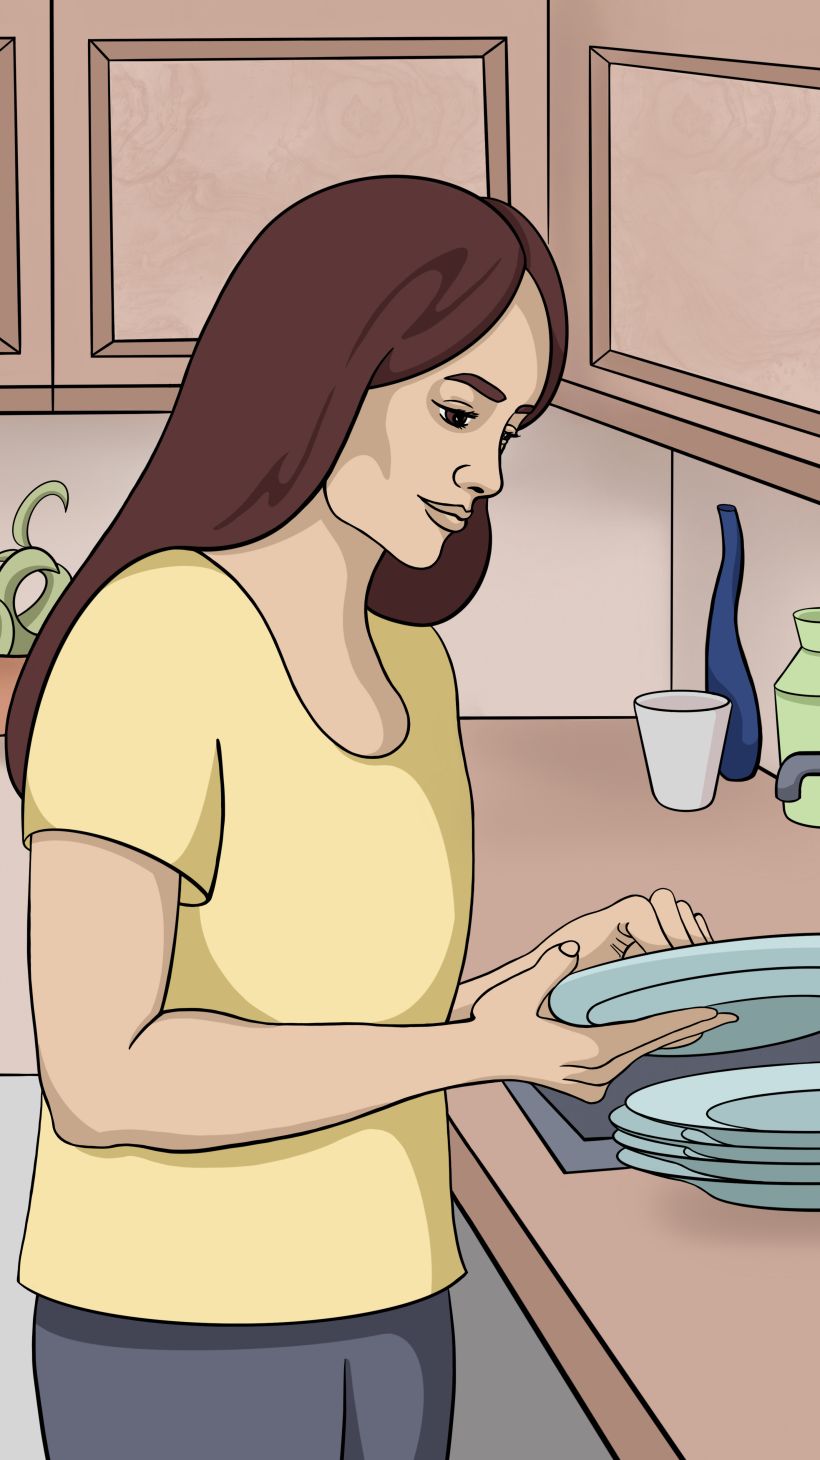 An illustration of a woman washing dishes and another woman sitting on the kitchen table with a cup of tea.